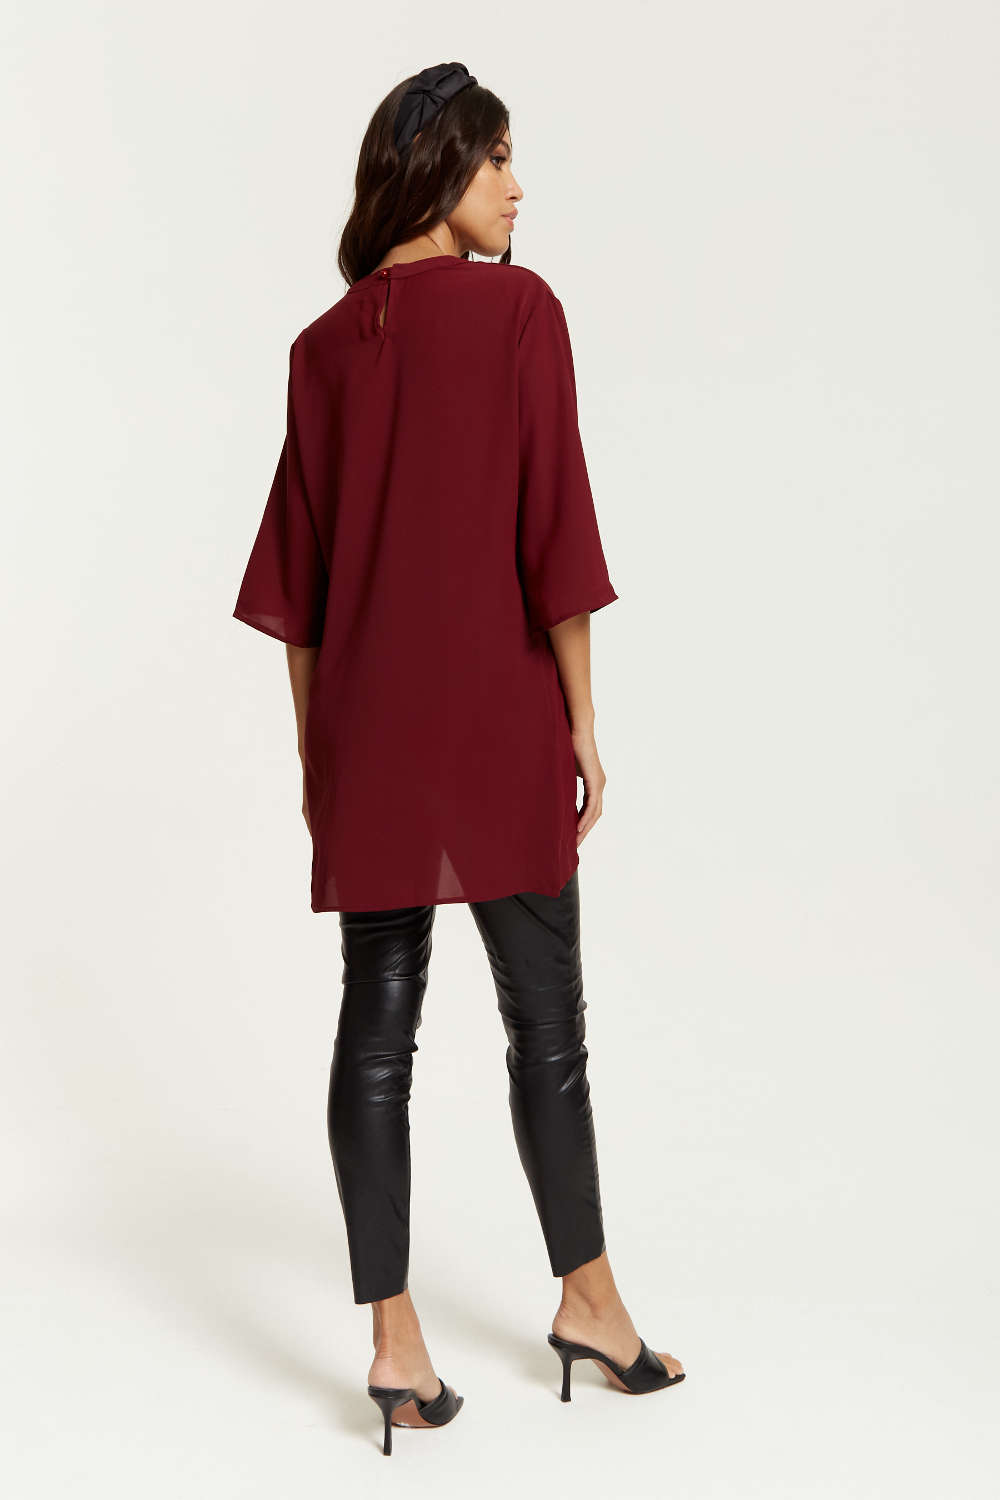 Oversized Detailed Neckline Tunic with 3/4 Sleeves in Burgundy GLR FASHION NETWORKING